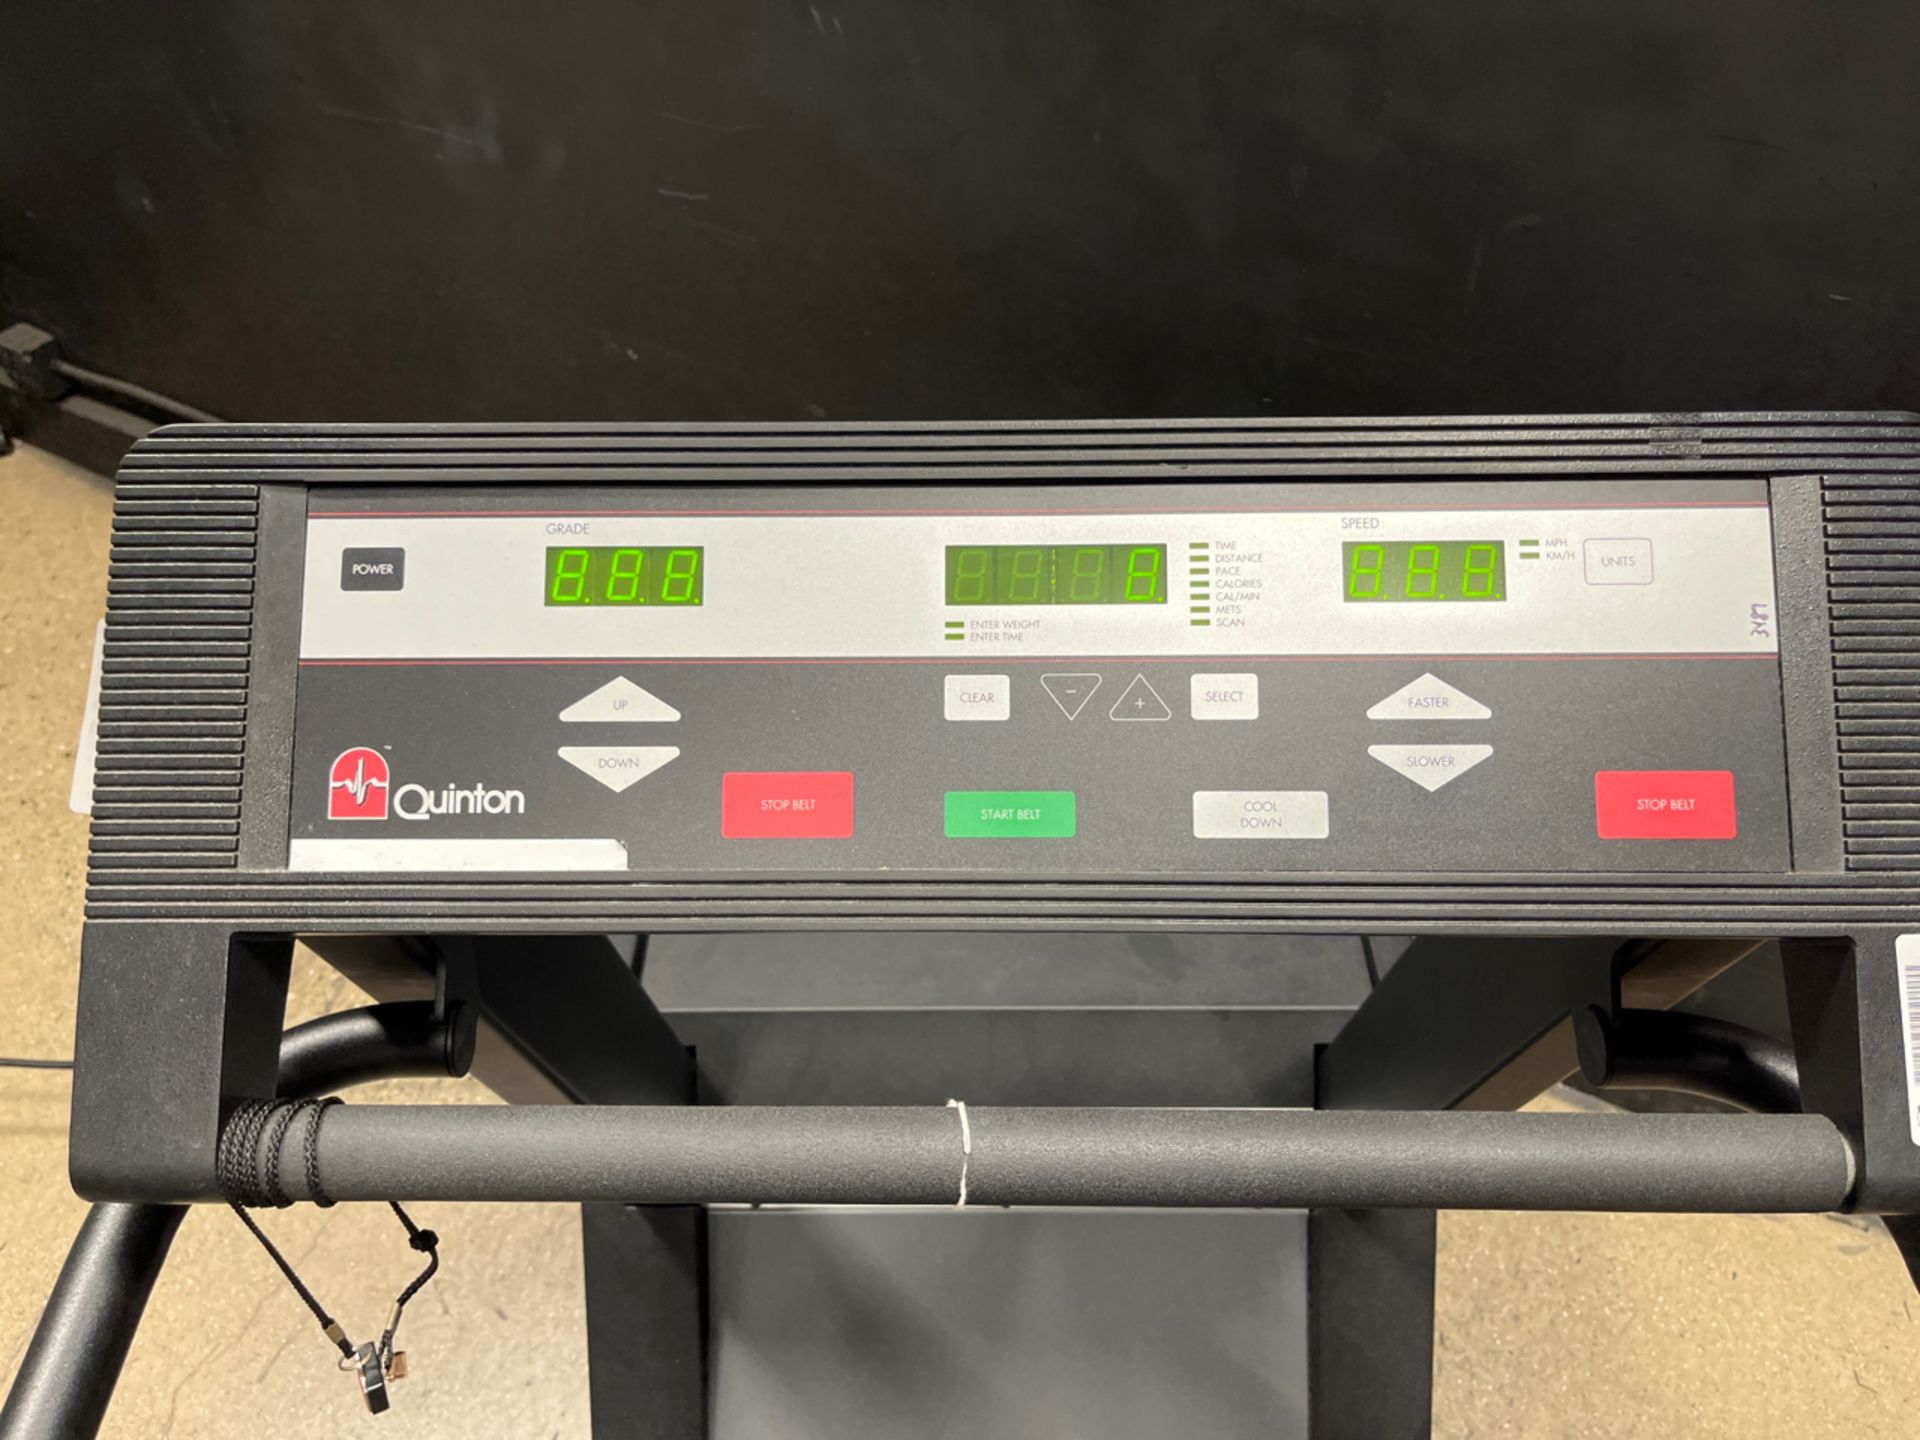 QUINTON MEDTRACK CR60 TREADMILL (LOCATED AT 3325 MOUNT PROSPECT ROAD, FRANKLIN PARK, IL, 60131) - Image 2 of 2